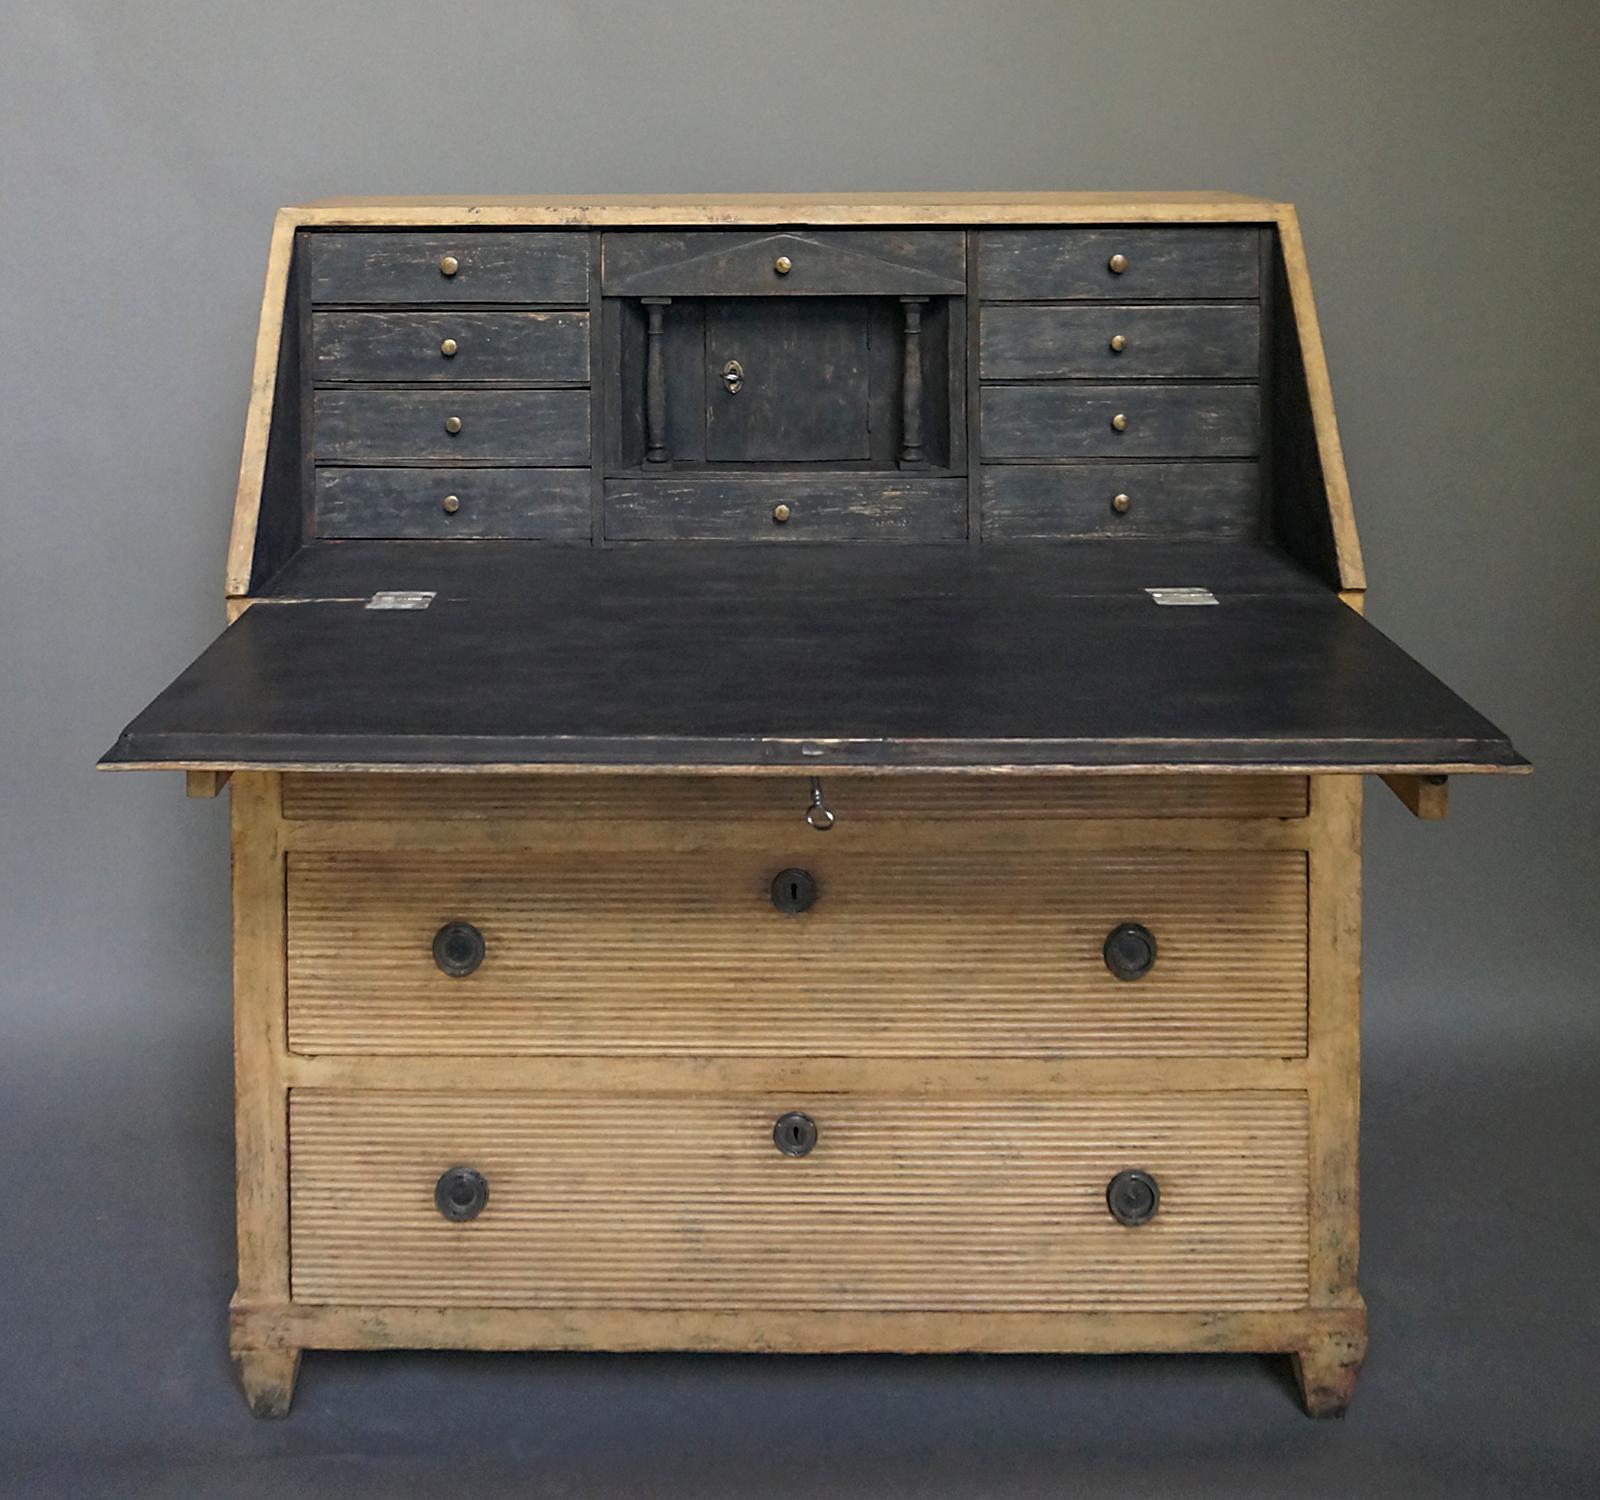 Remarkable neoclassical writing desk, Sweden circa 1850, with original painted surface, original hardware, and no repairs. Behind the slant-front with reeded lozenge is a fitted interior with drawers and a central compartment styled as a Greek